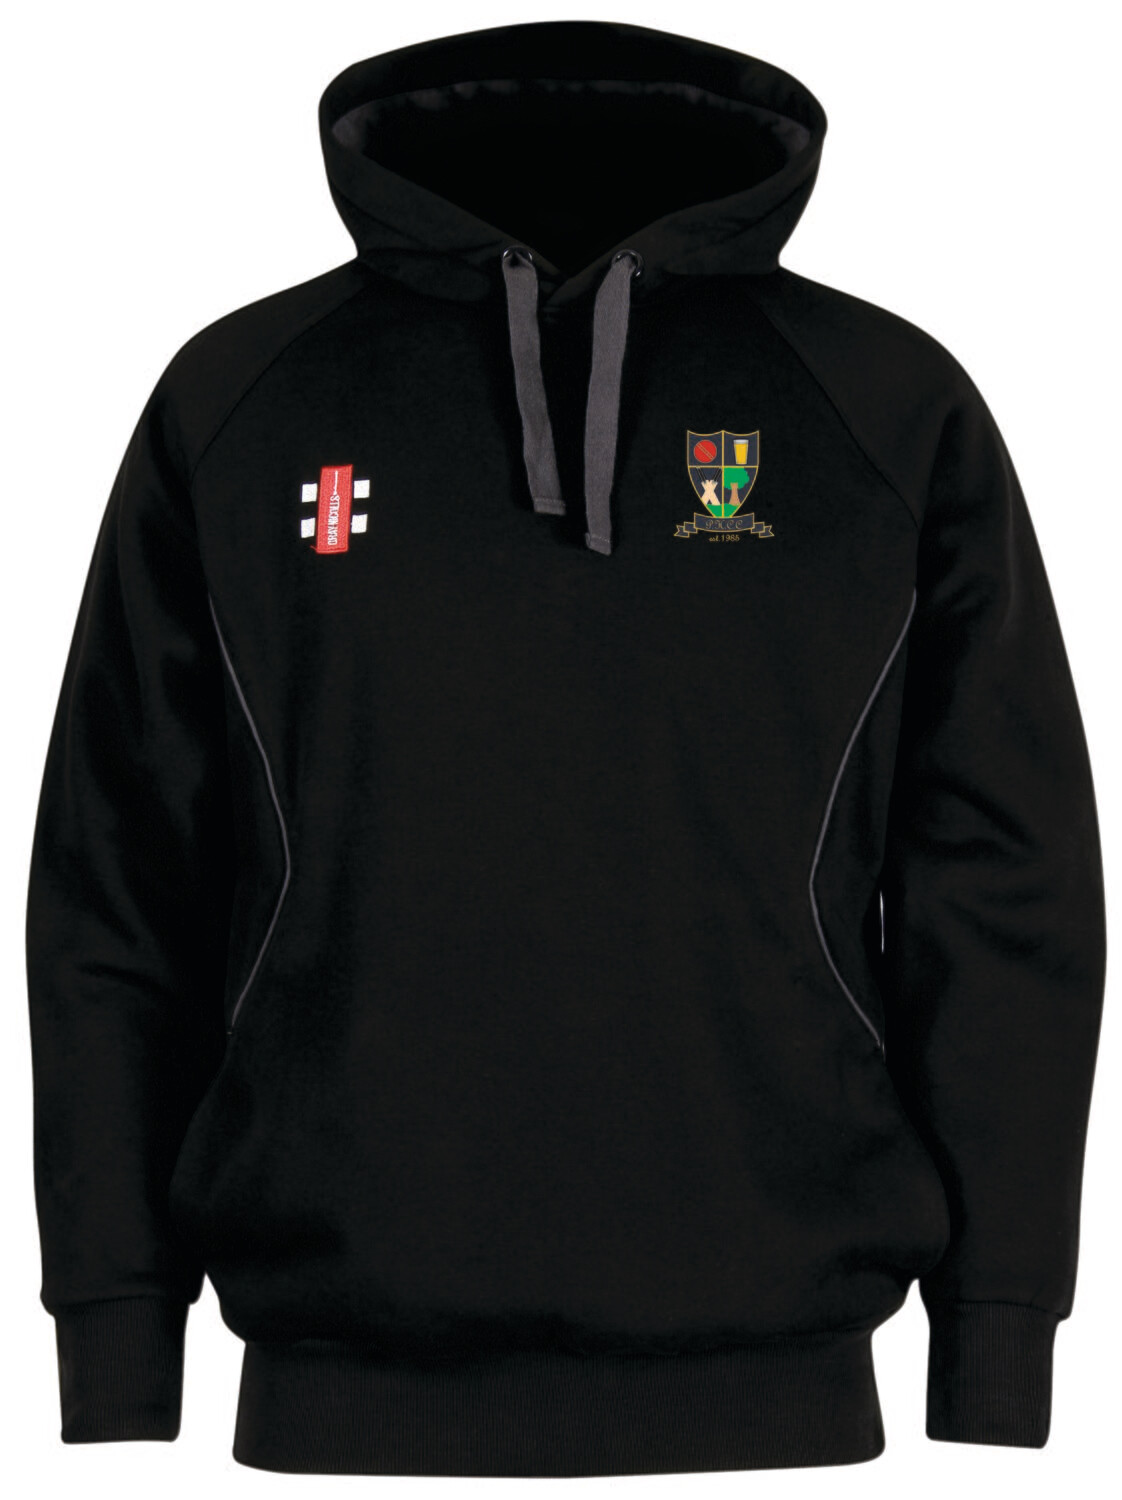 Parkhouse Storm Hooded Top